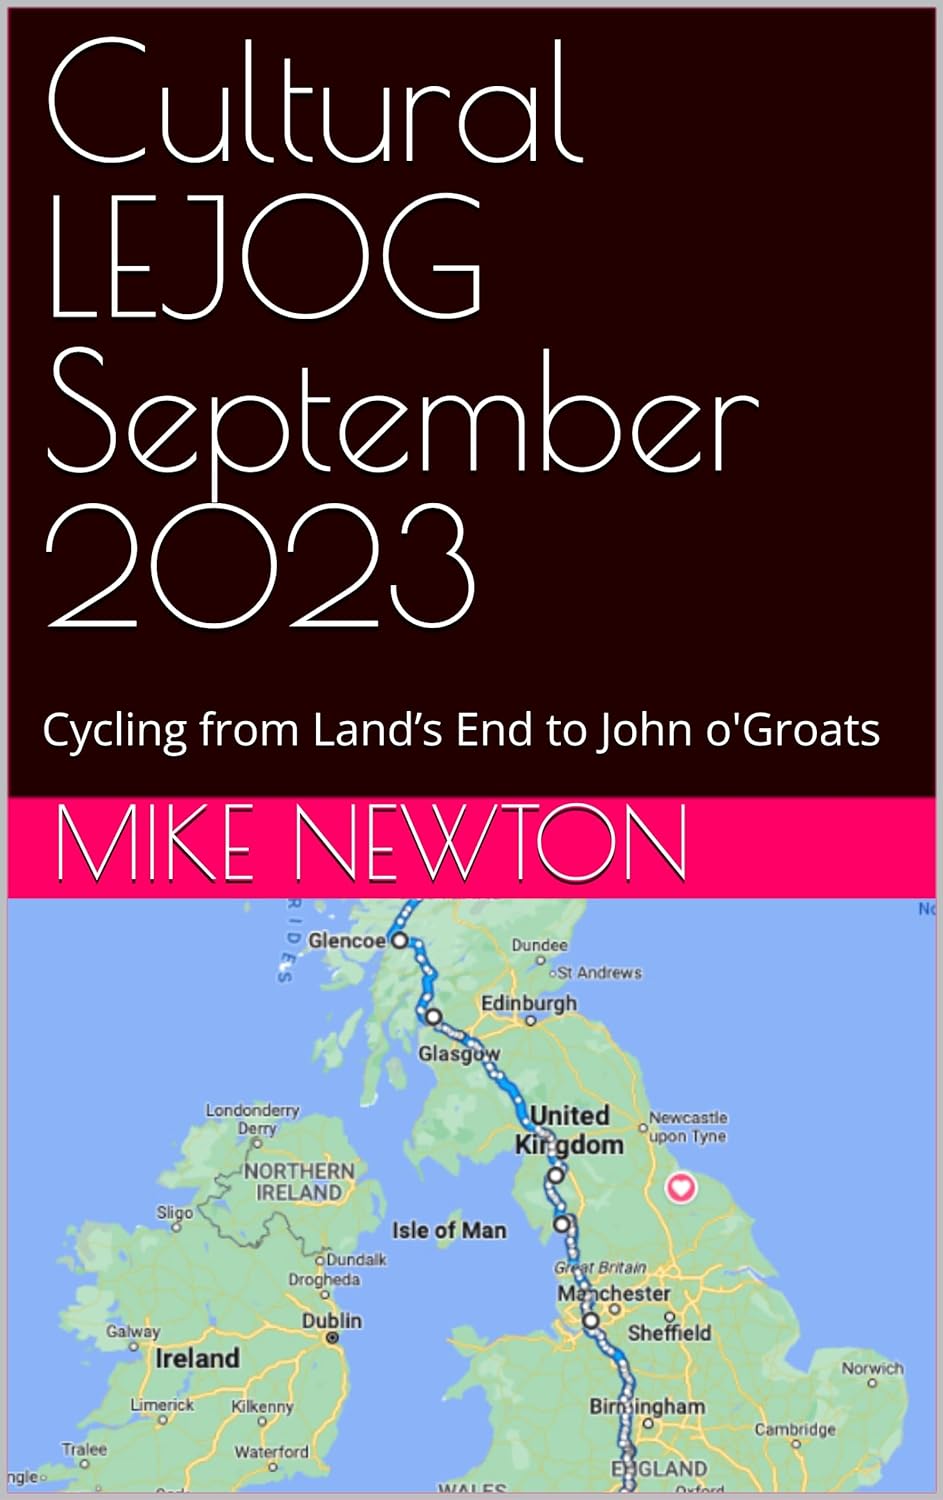 Cultural LEJOG by Mike Newton on Amazon